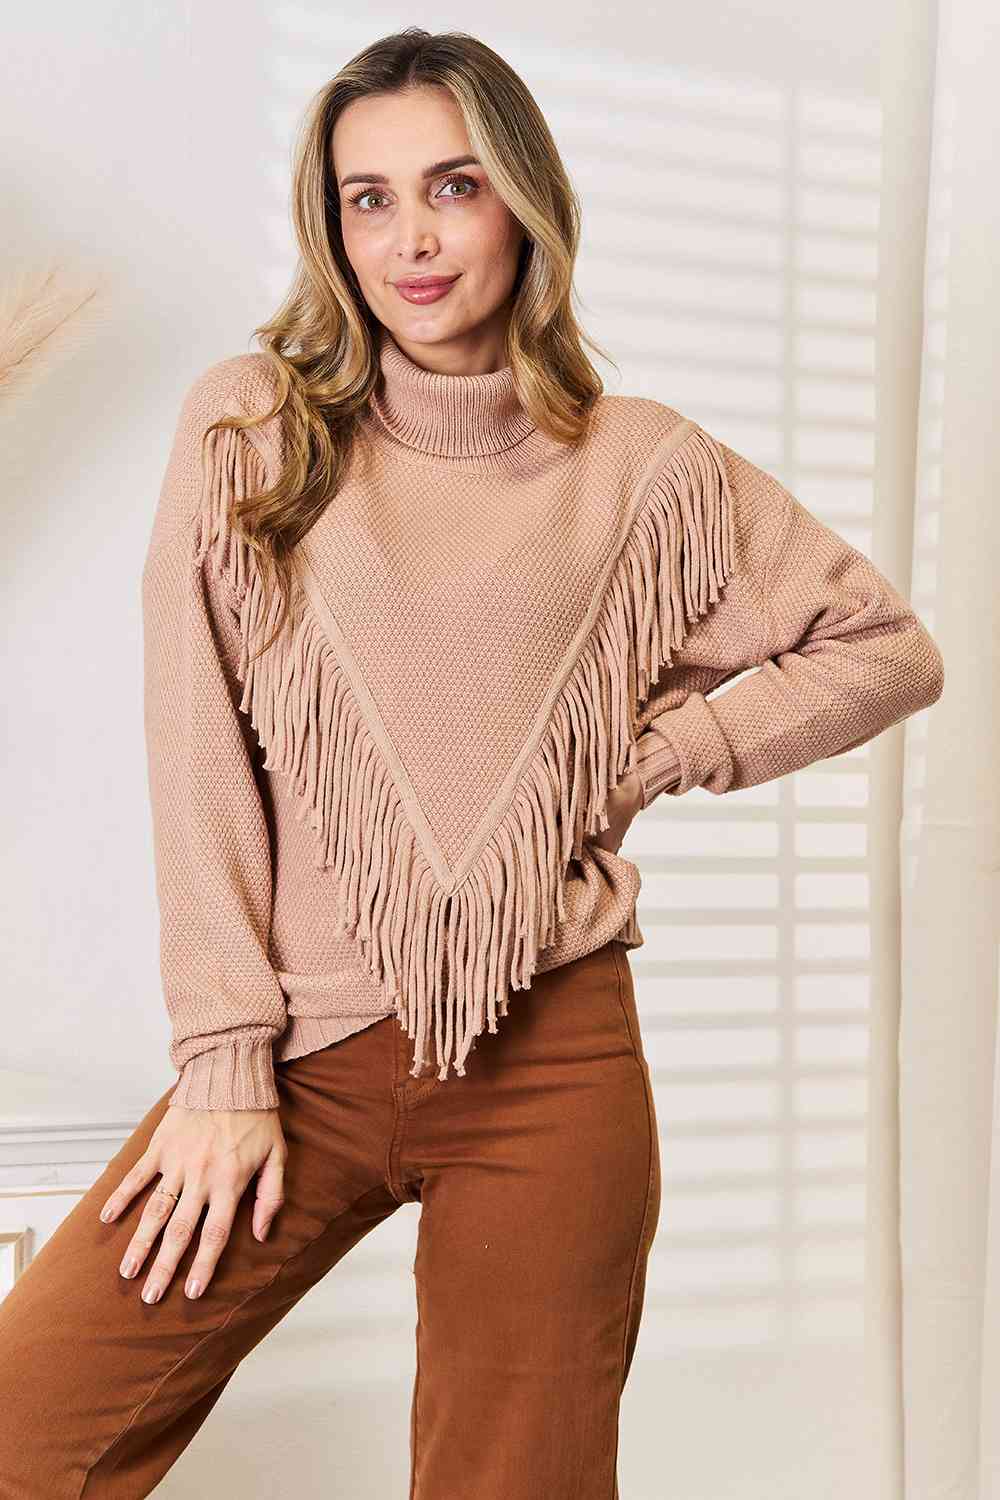 Turtleneck Fringe Front Long Sleeve Sweater - Camel / S - Sweaters - Shirts & Tops - 1 - 2024